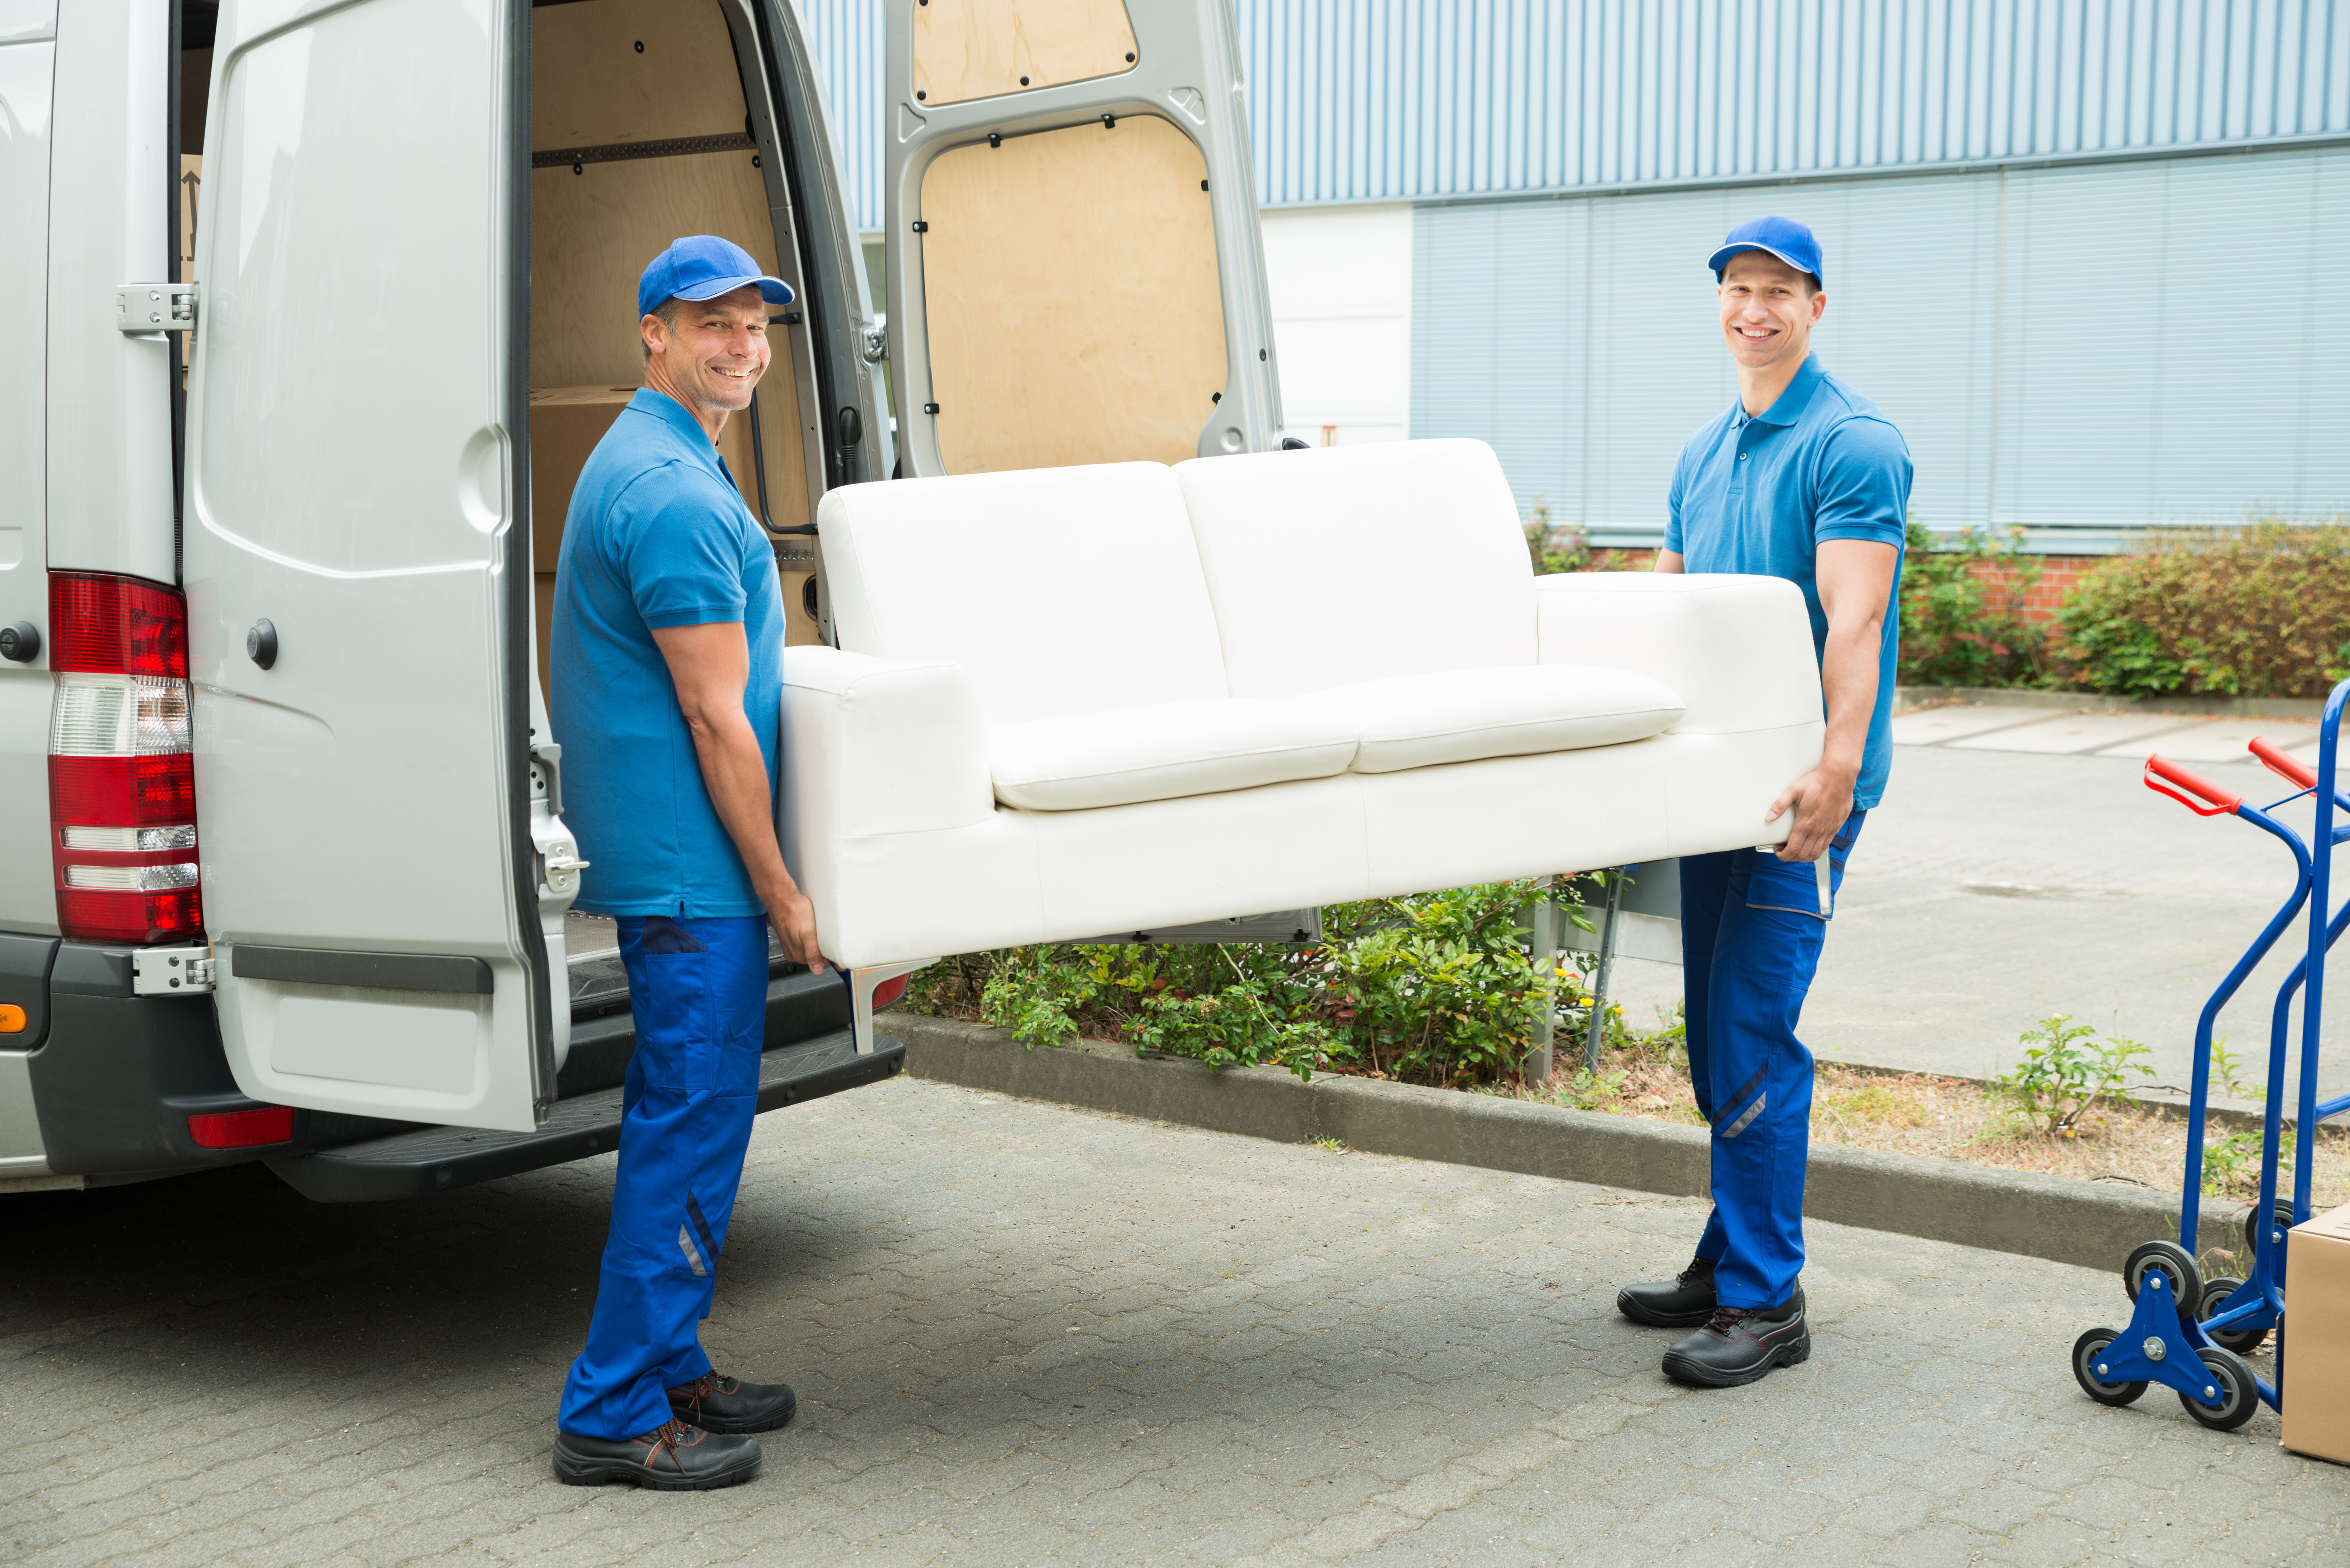 3 Questions to Ask Moving Companies Before Choosing One to Hire